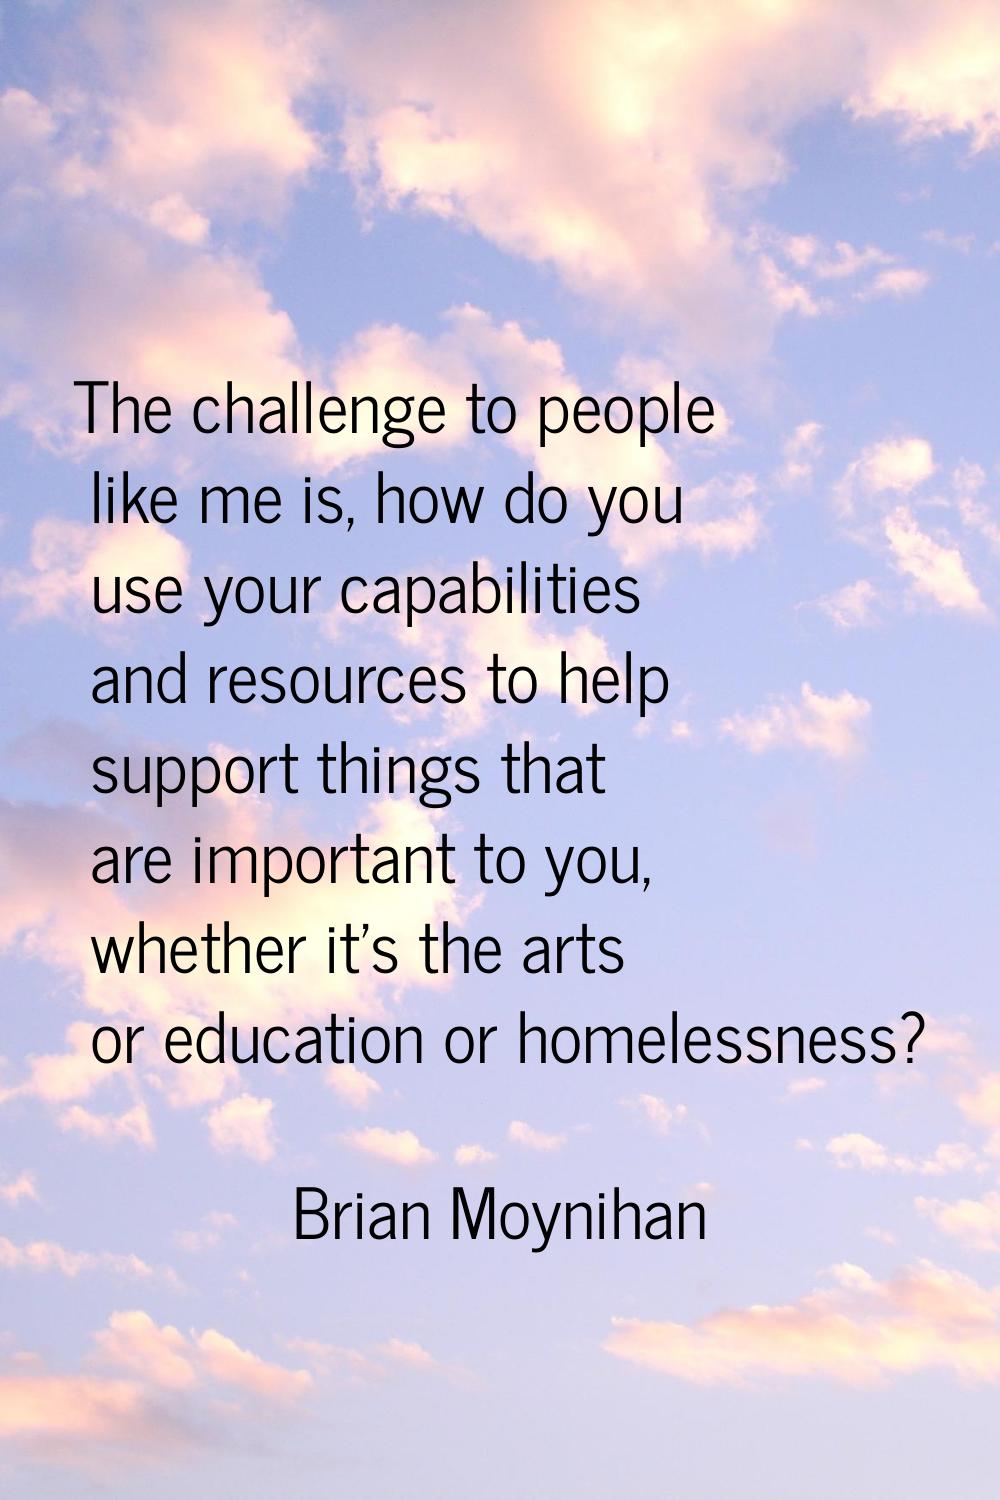 The challenge to people like me is, how do you use your capabilities and resources to help support 